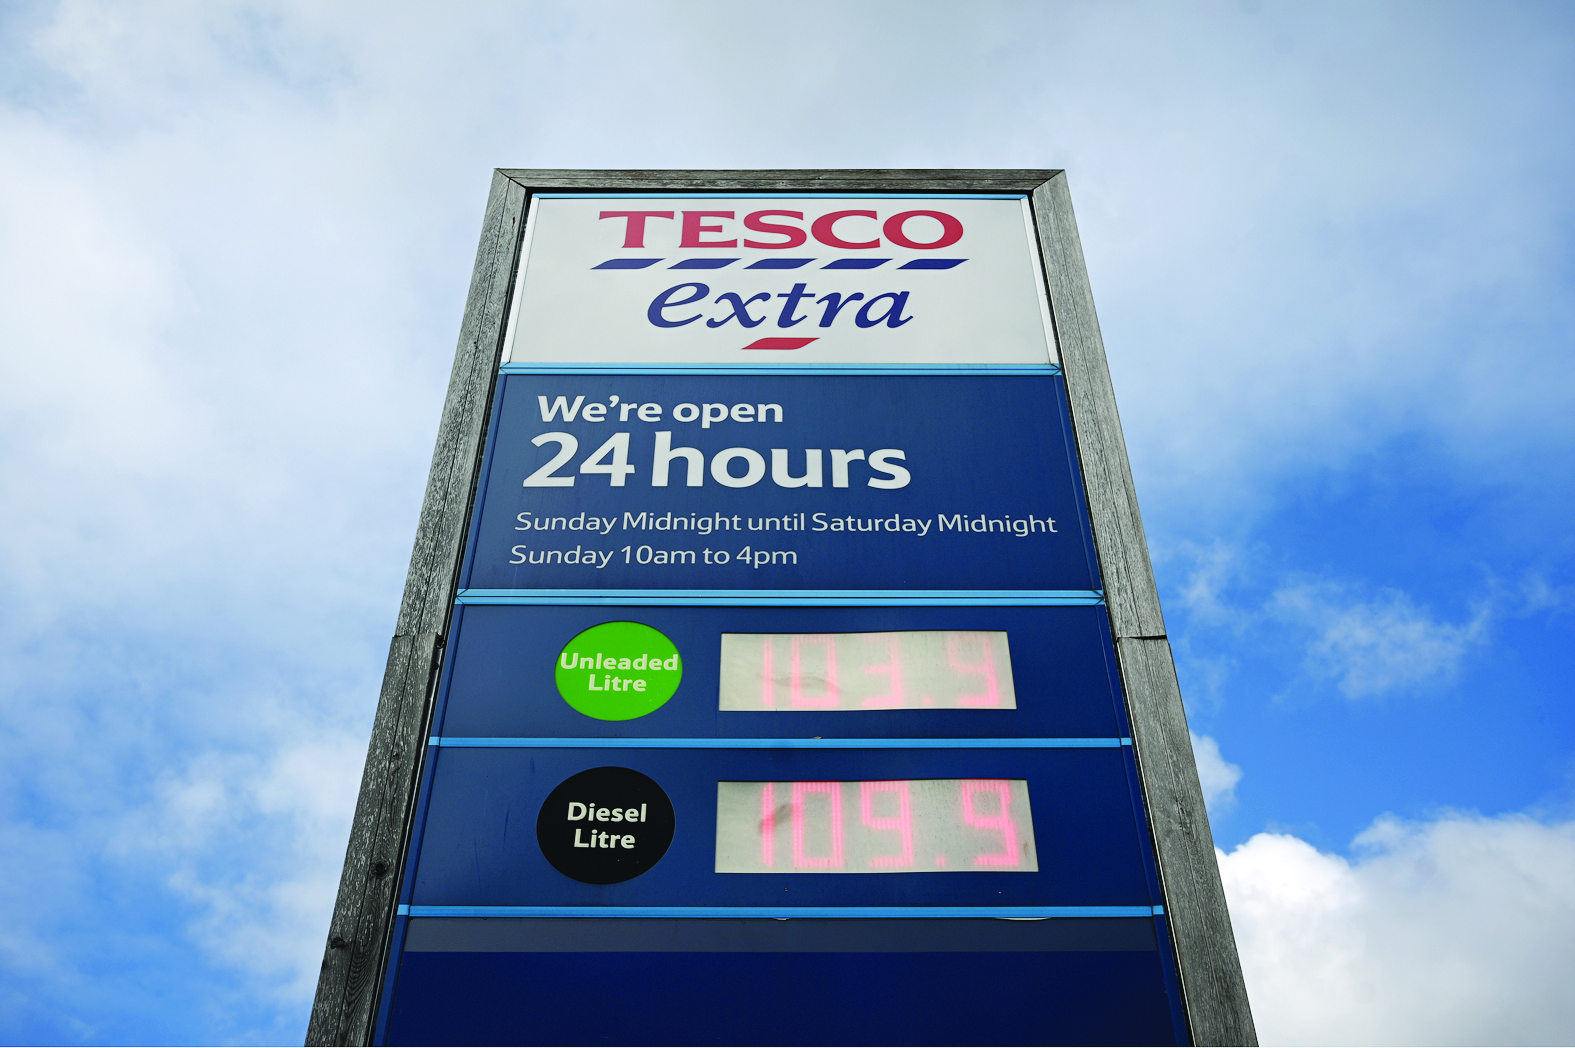 An electronic display board shows the prince in pence per litre for petrol and , in York, northern England on March 30, 2020, as life in Britain continues during the nationwide lockdown to combat the novel coronavirus pandemic. - Oil prices plunged Monday as the number of novel coronavirus cases worldwide surged past 700,000, reinforcing worries about the impact on the global economy. Crude oil struck the lowest levels in more than 17 years on Monday, with Brent North Sea tumbling to $22.58 per barrel at one point. (Photo by Oli SCARFF / AFP)